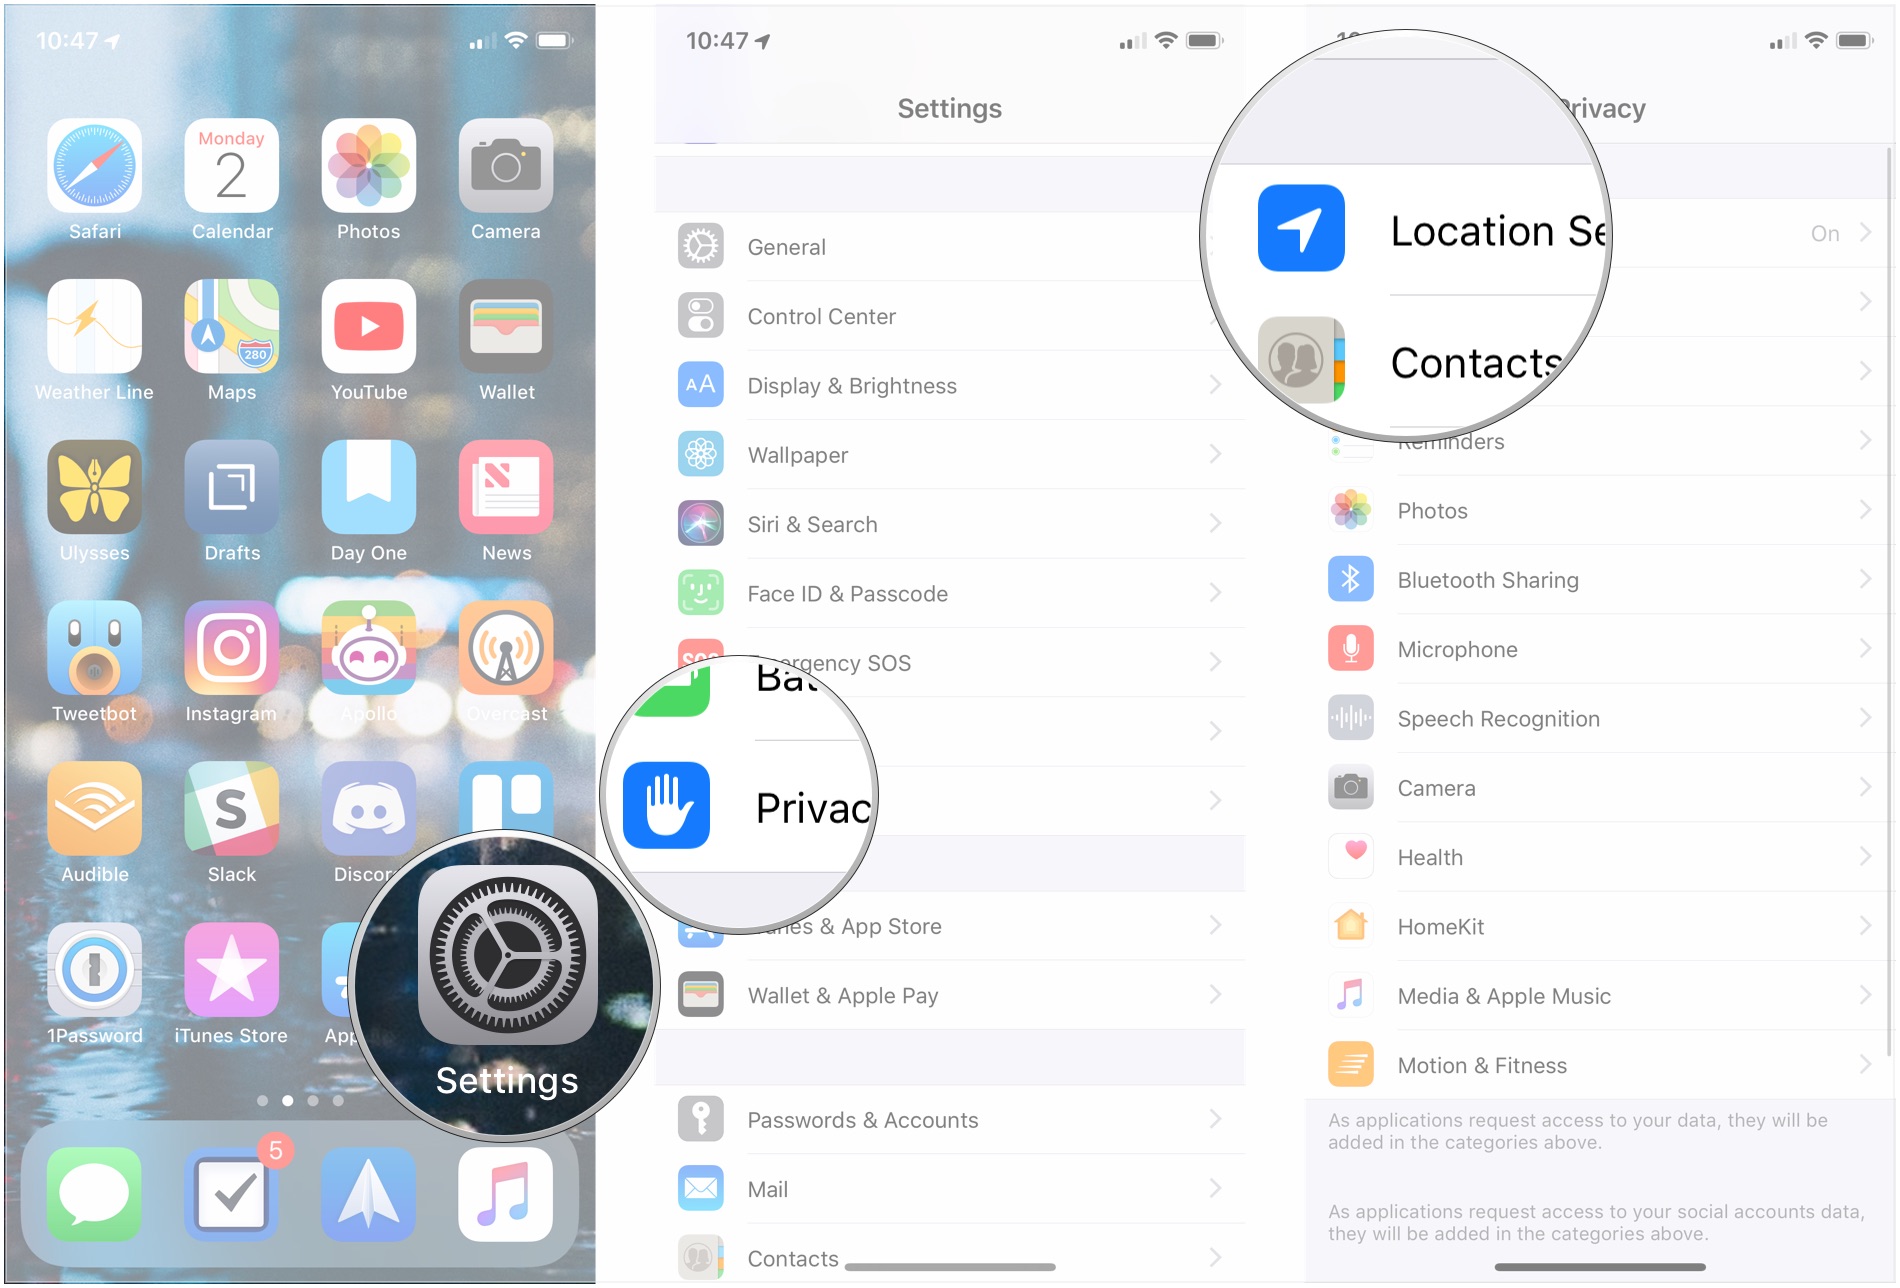 Open Settings, tap Privacy, tap Location Services